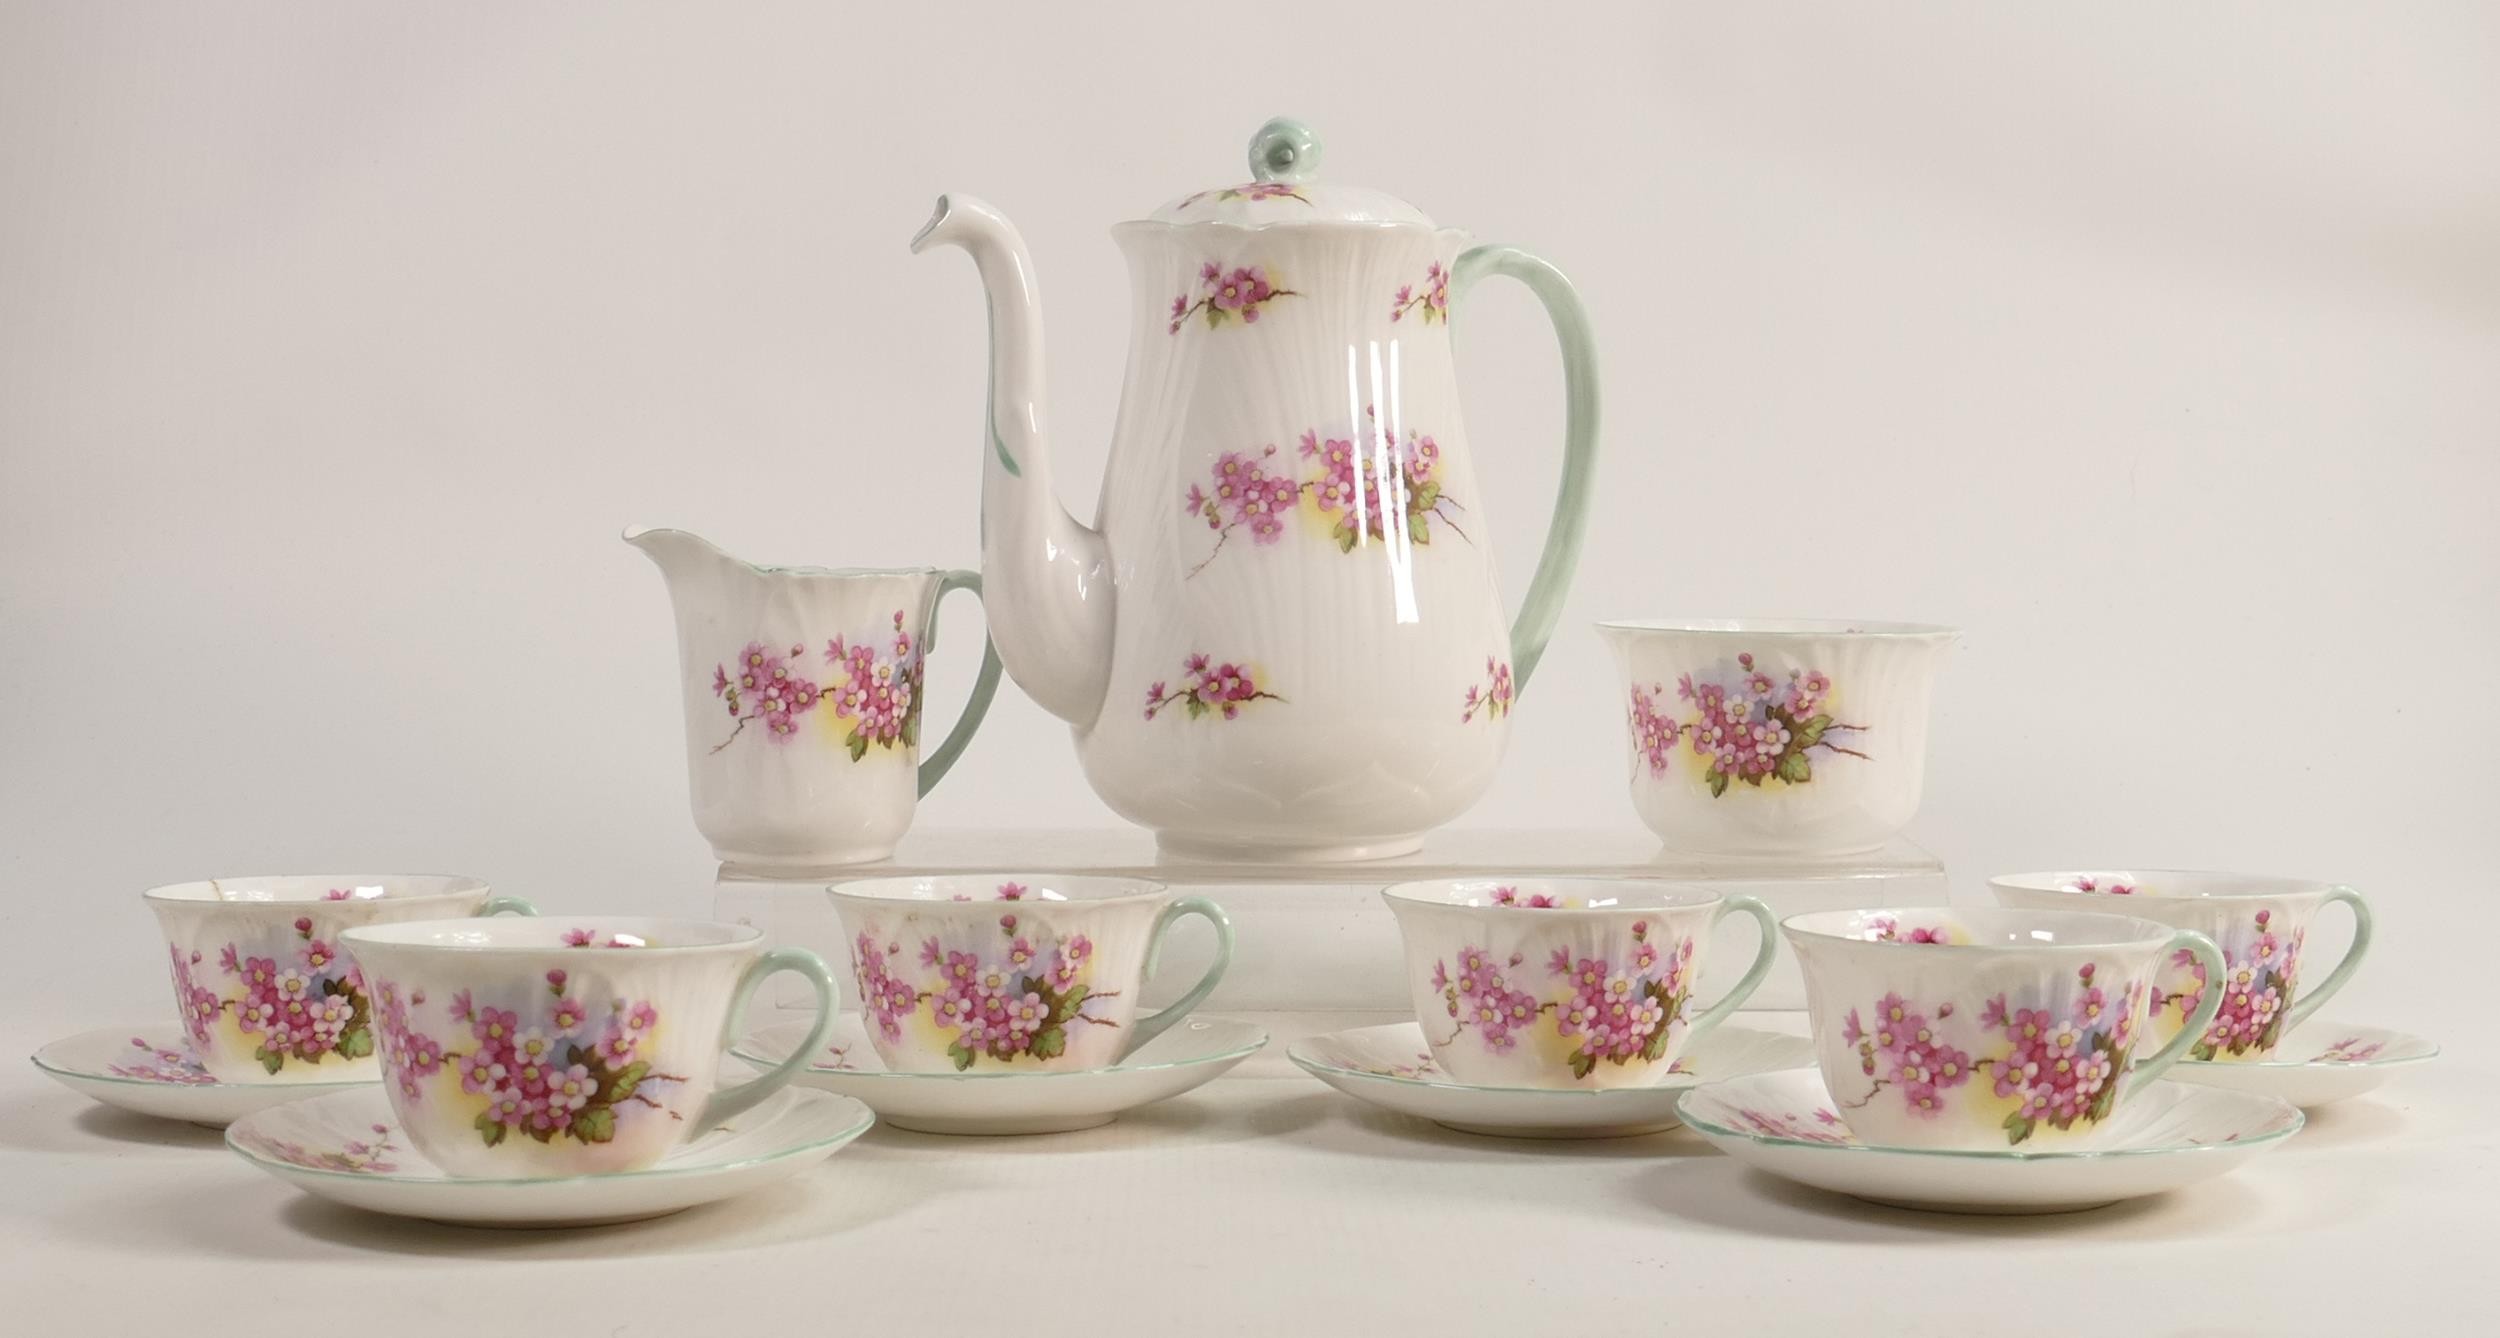 Shelley Oleander shape coffee set pattern 13429, stock pattern. Consisting of coffee pot, 6 cups and